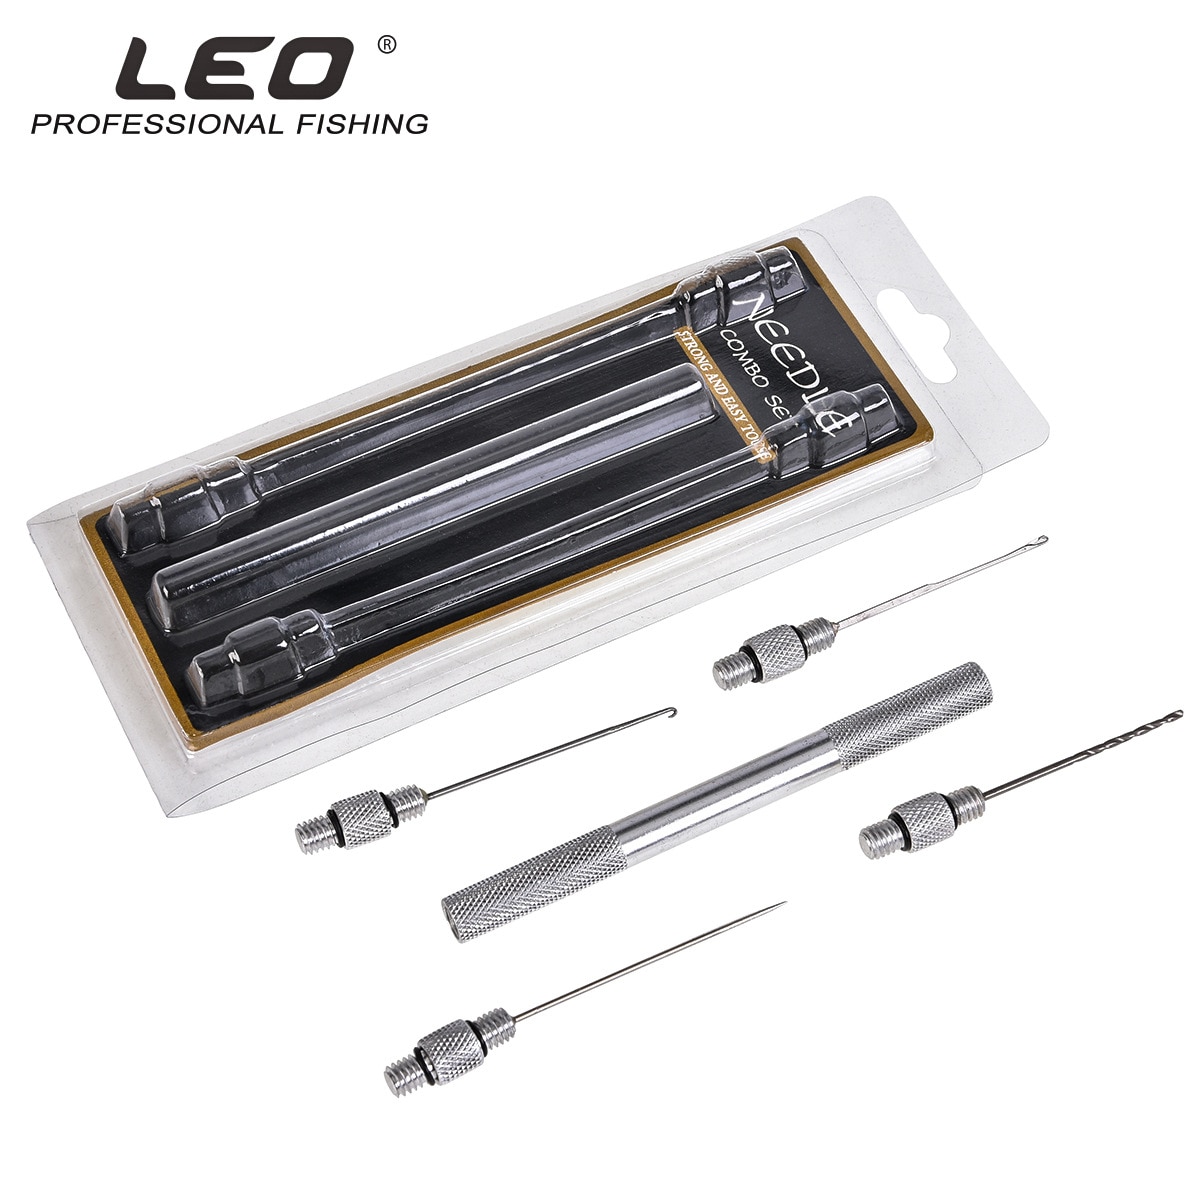 1 Set Leo 5 in 1 Boilie Needle Baiting Tool 27936 Carp Fishing for Bait Load Multifunctional Fishing Accessory Pesca Lure Needle